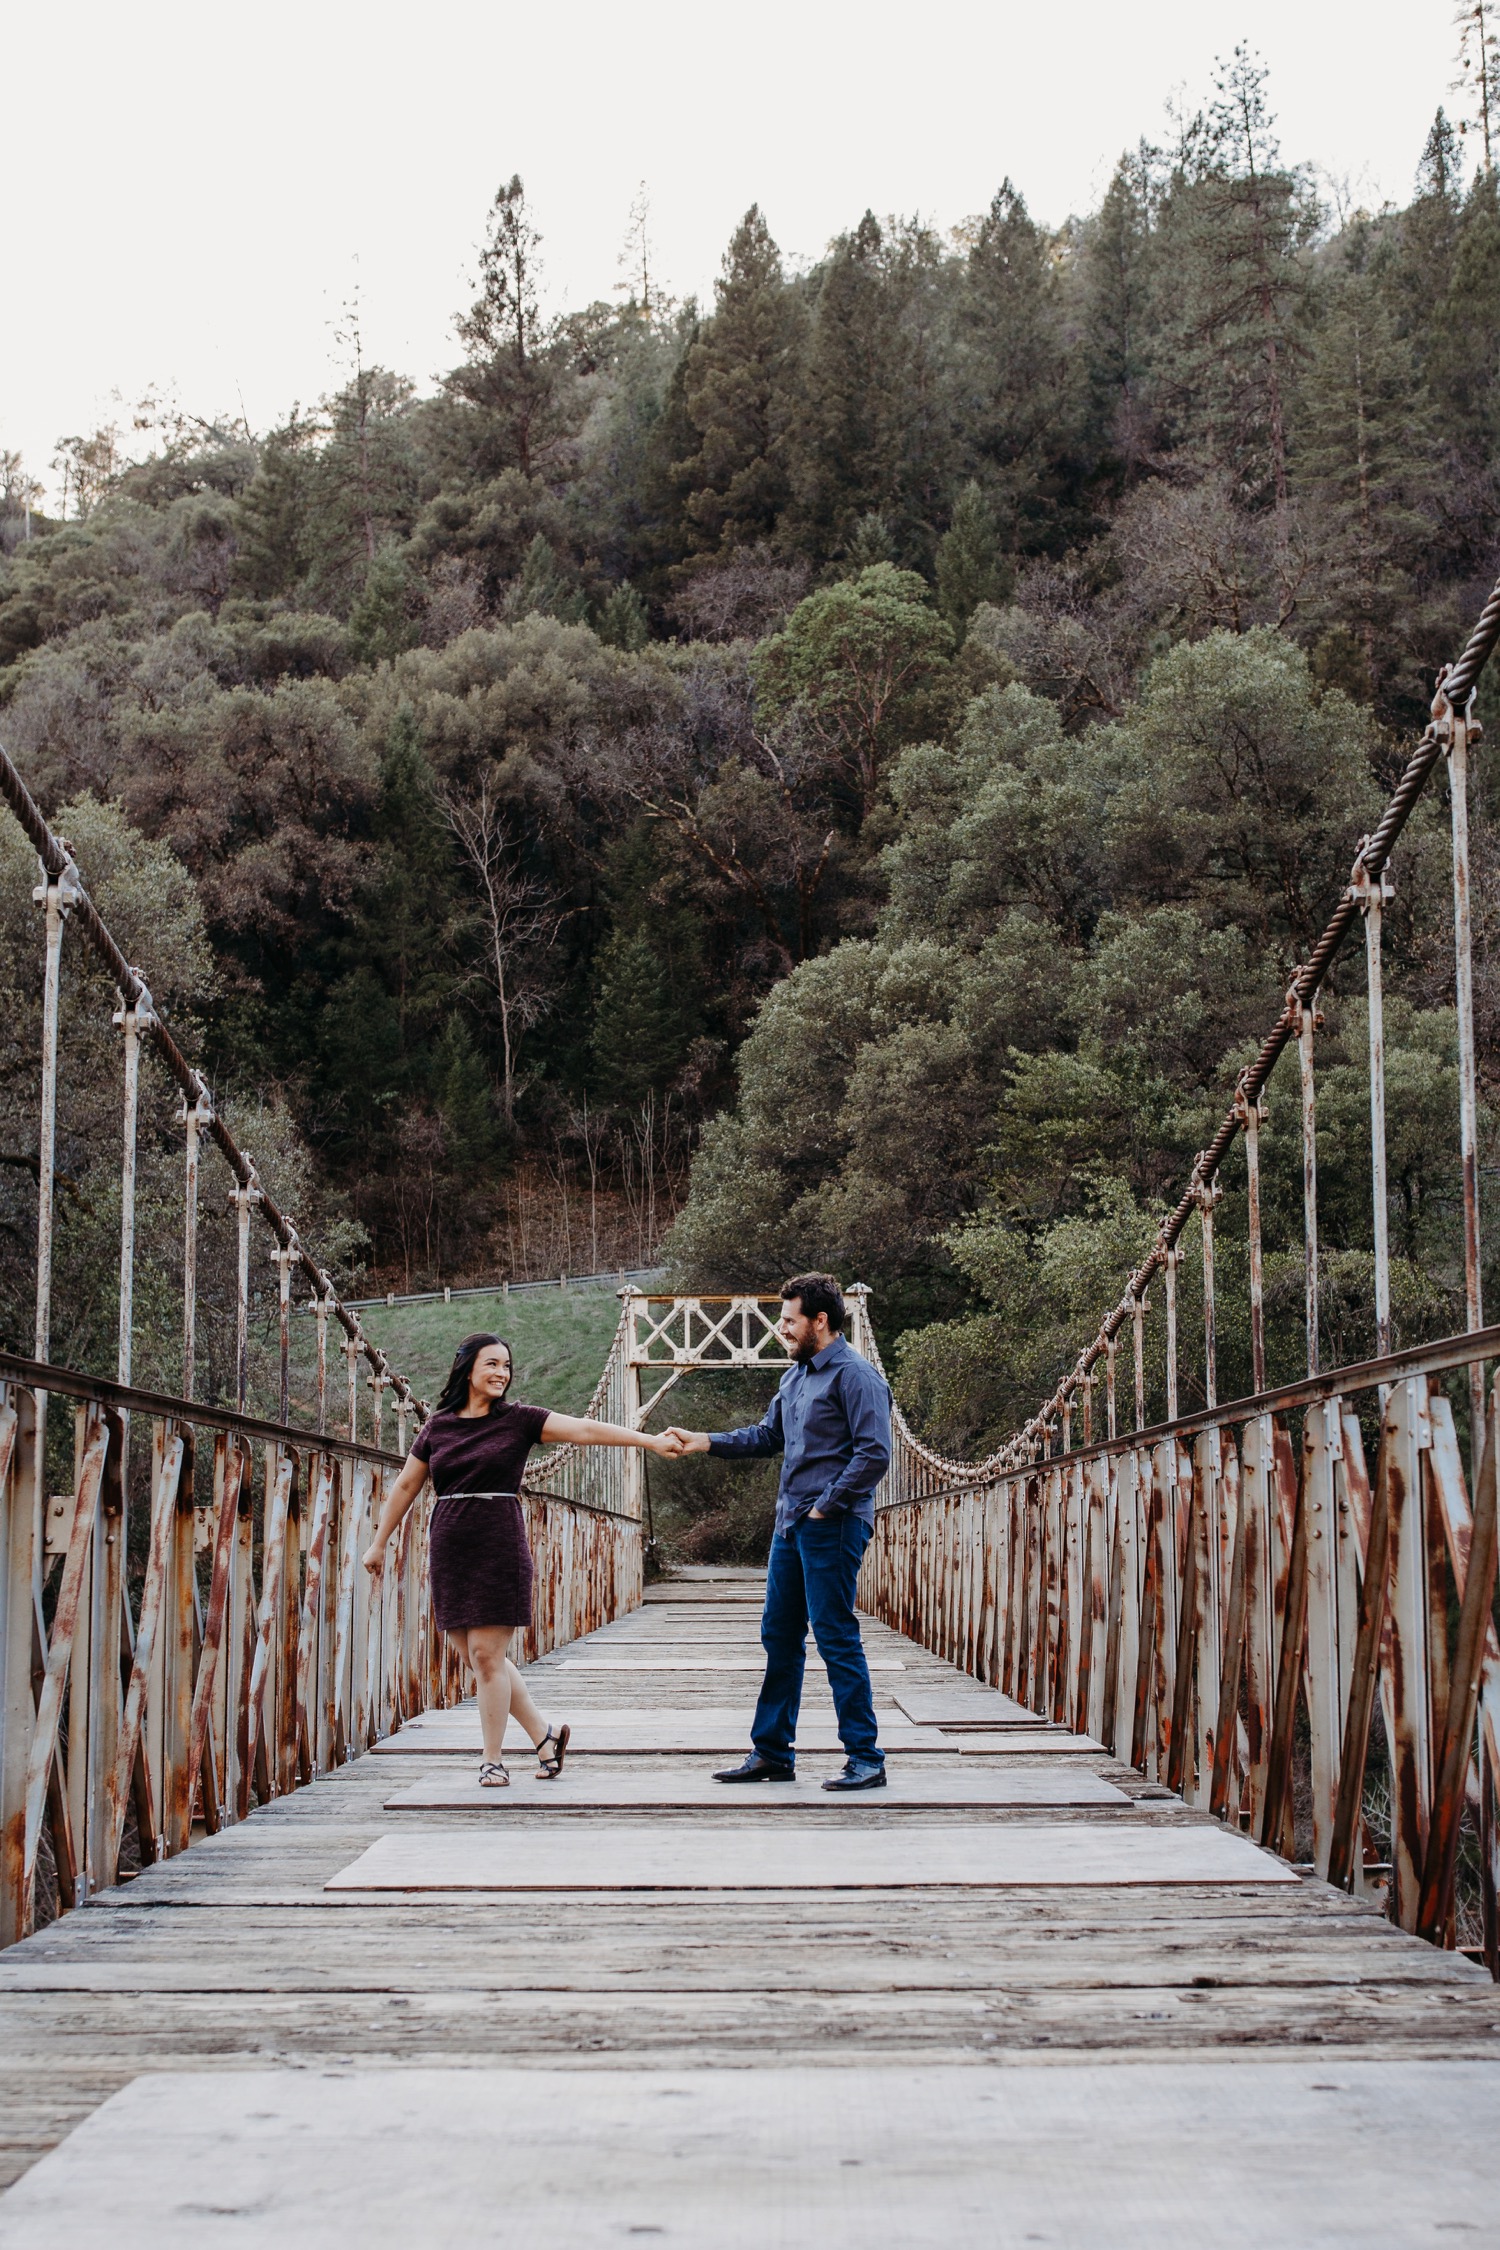 Couple dances on a suspension bridge with green forest in the distance during their American River engagement photoshoot.